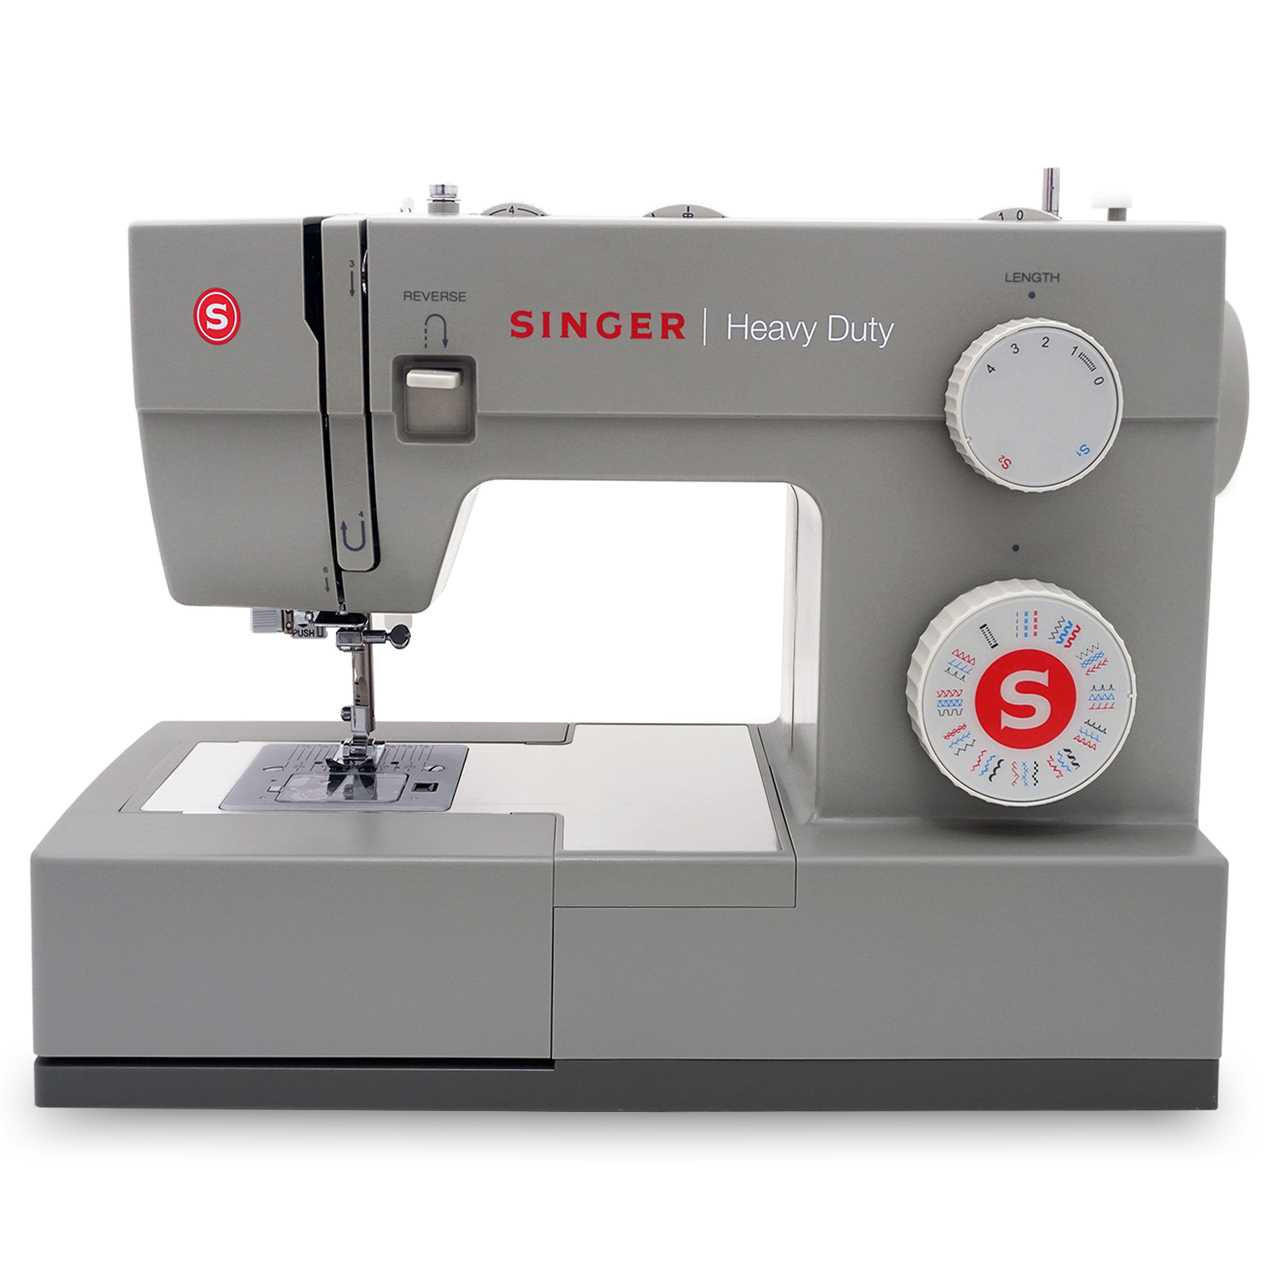 AS-IS SINGER 4432 Heavy Duty Sewing Machine with Foot Pedal